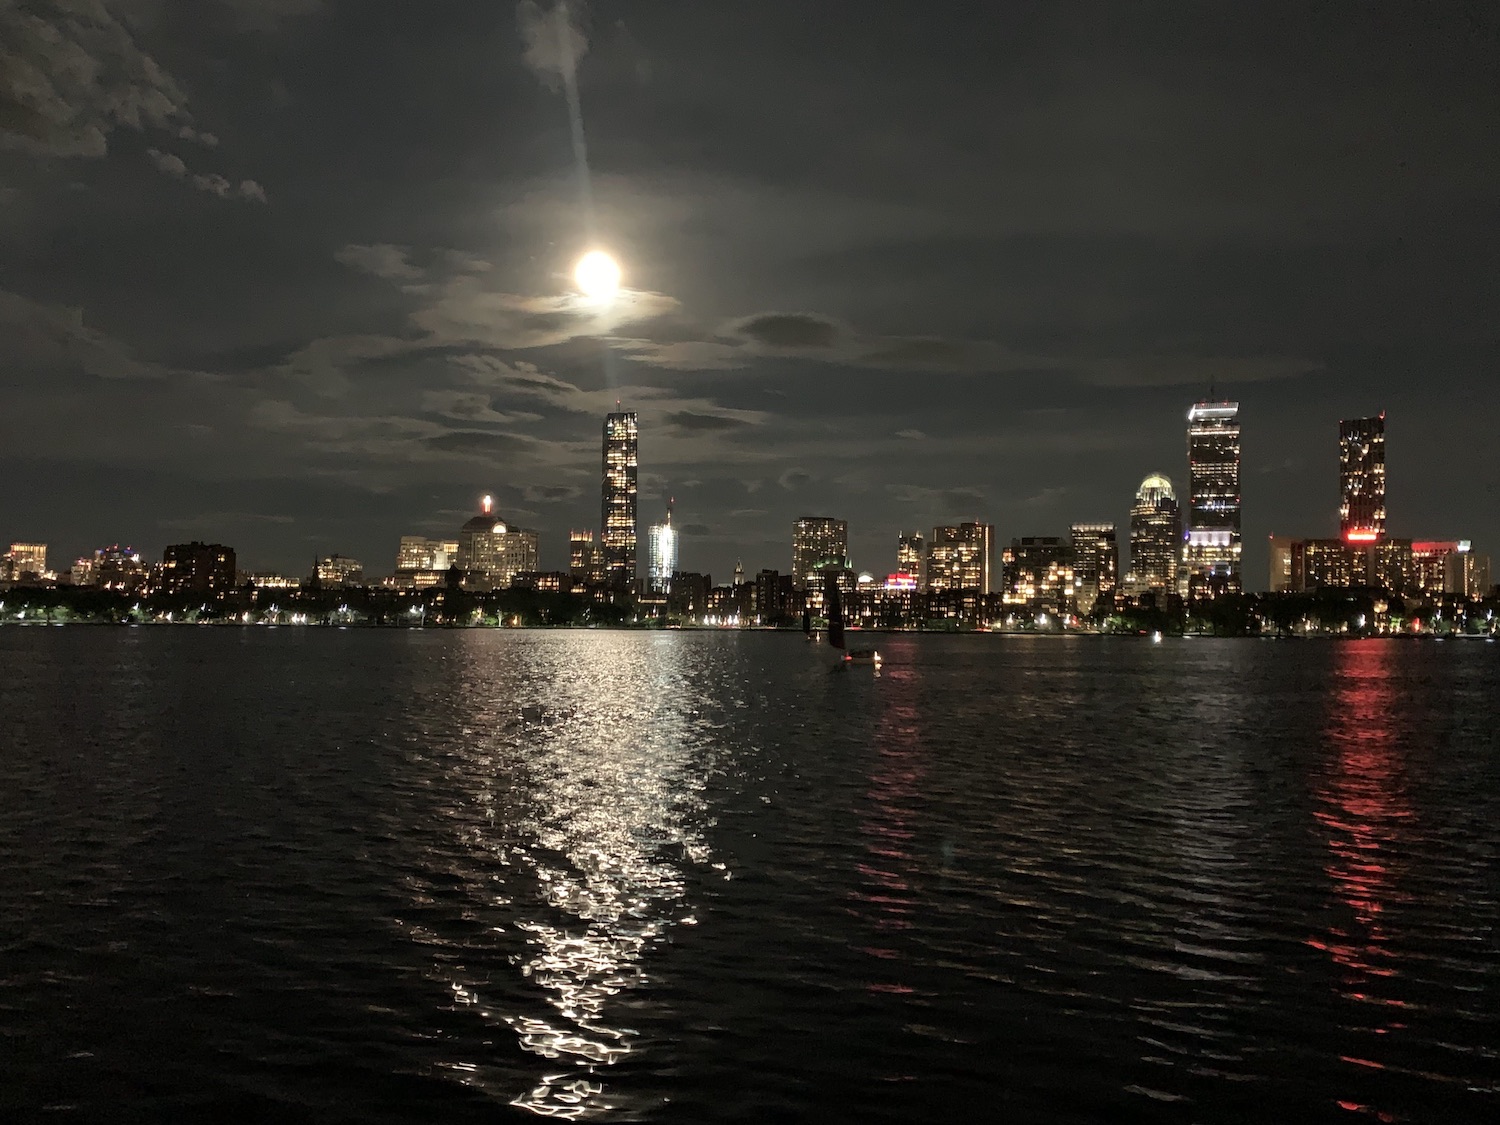 A blood moon over the night skyline of Boston.